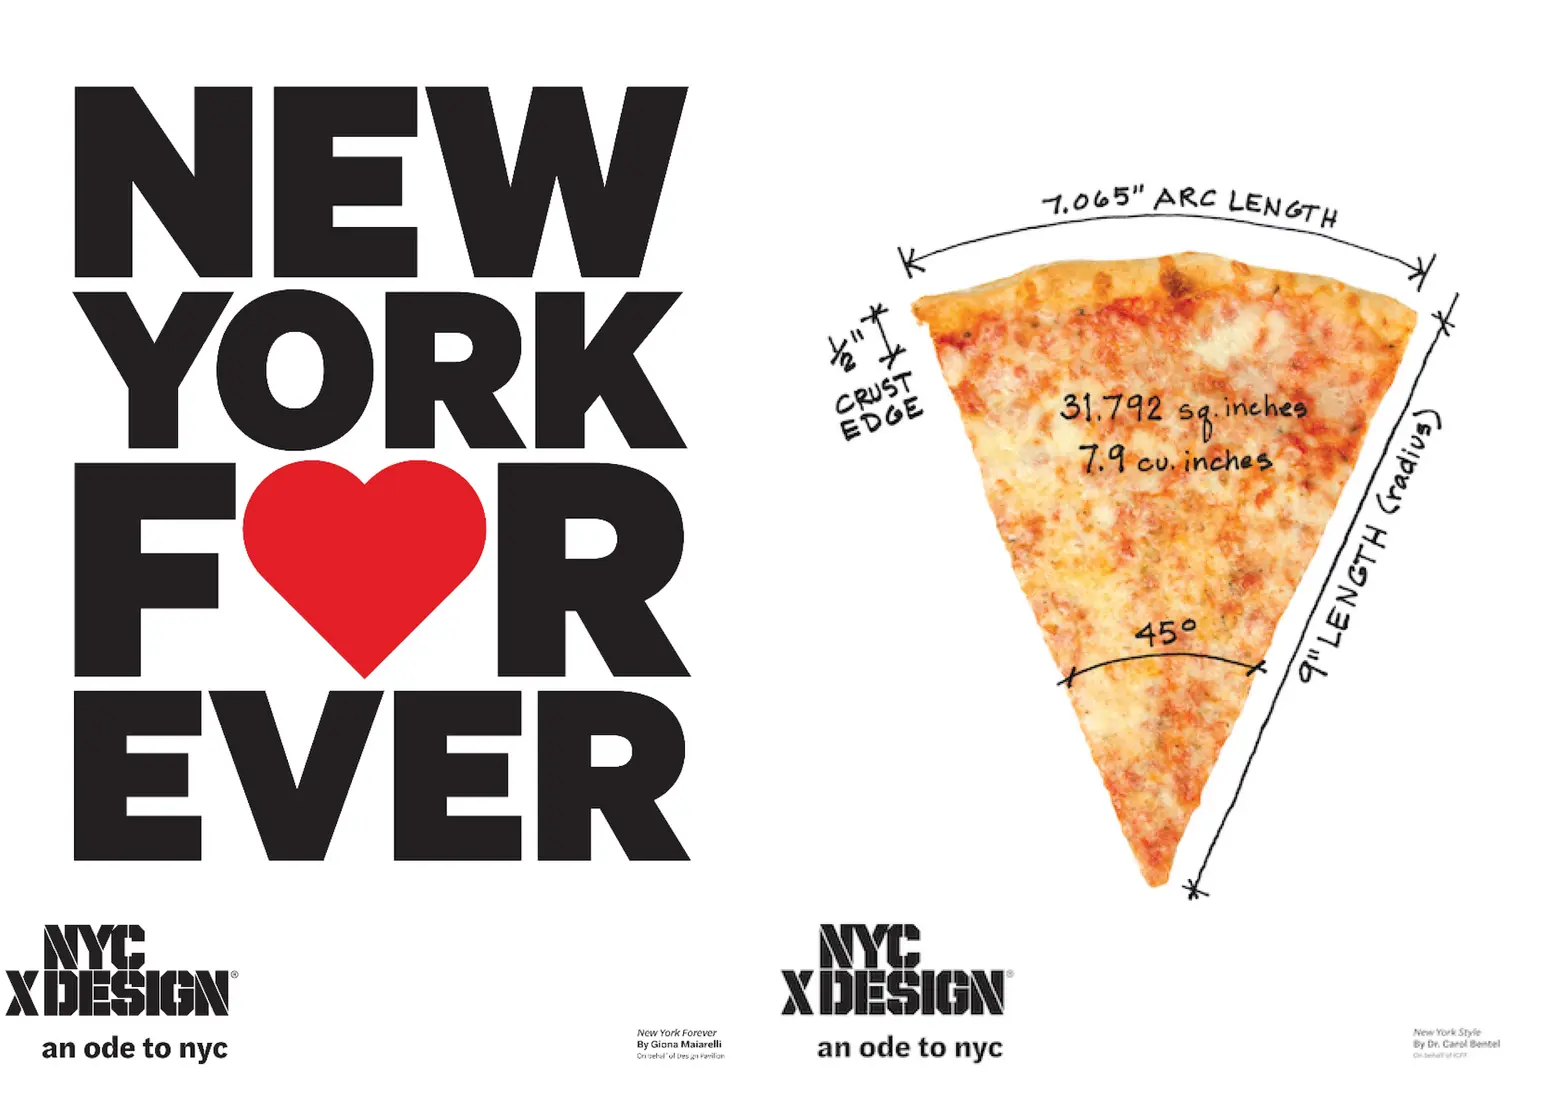 ‘Ode to NYC’ poster campaign spreads love across the five boroughs with heartfelt artwork